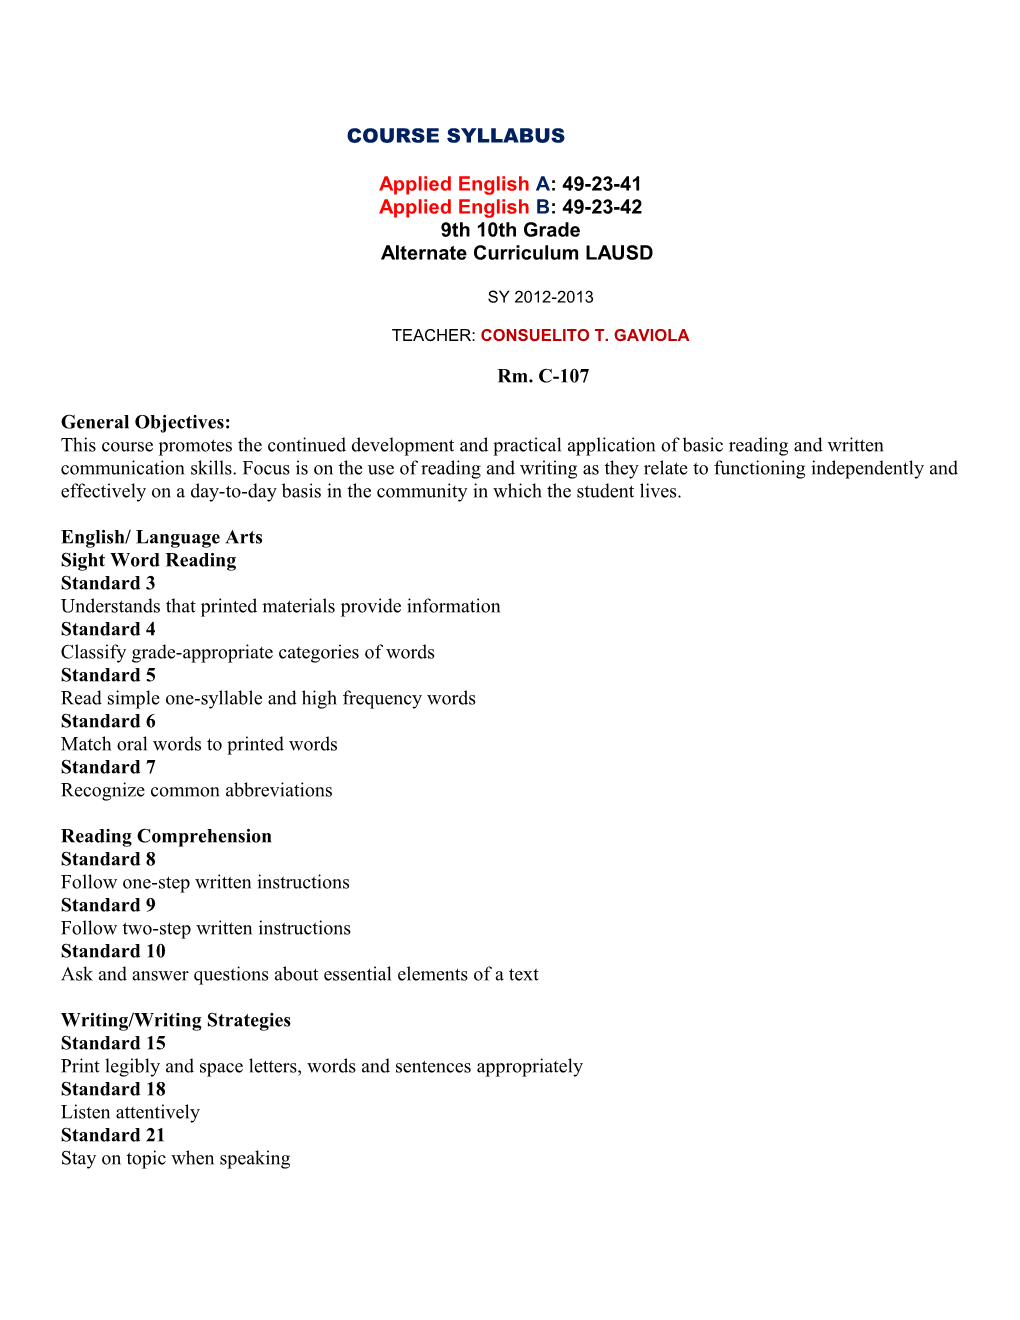 Applied English A: 49-23-41